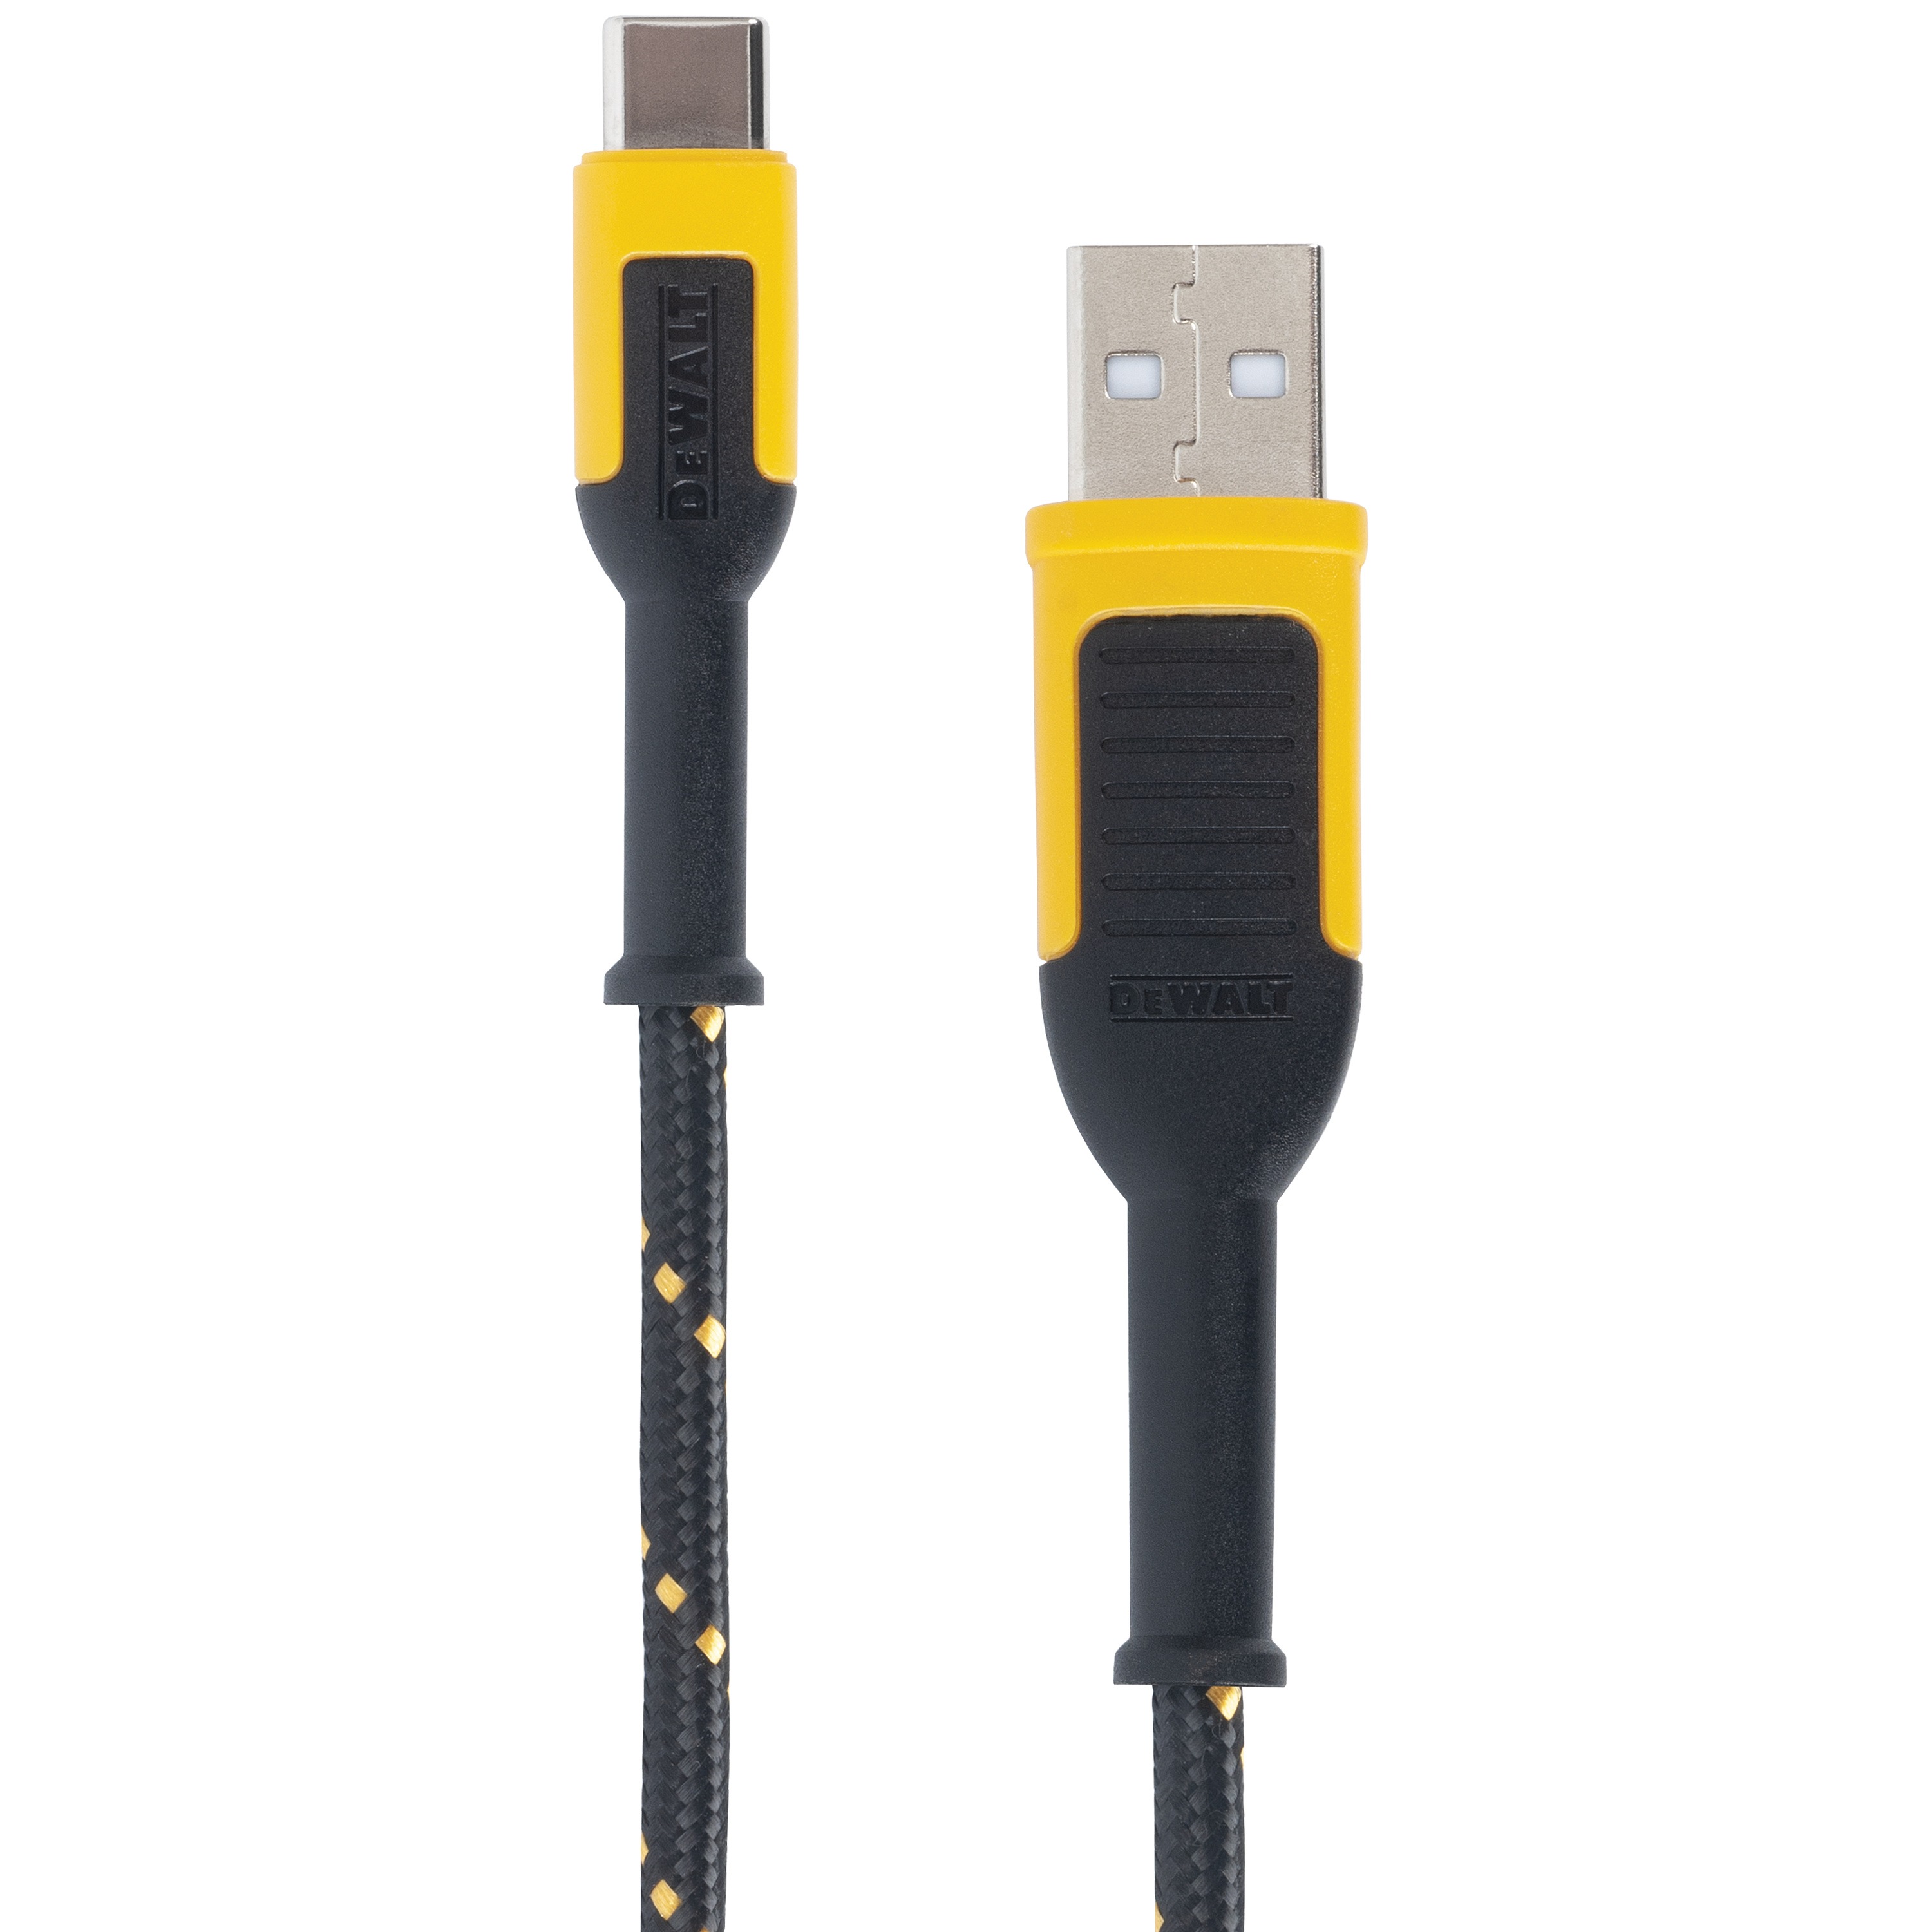 Reinforced Charging Cable For Usb C To Usb Dewalt